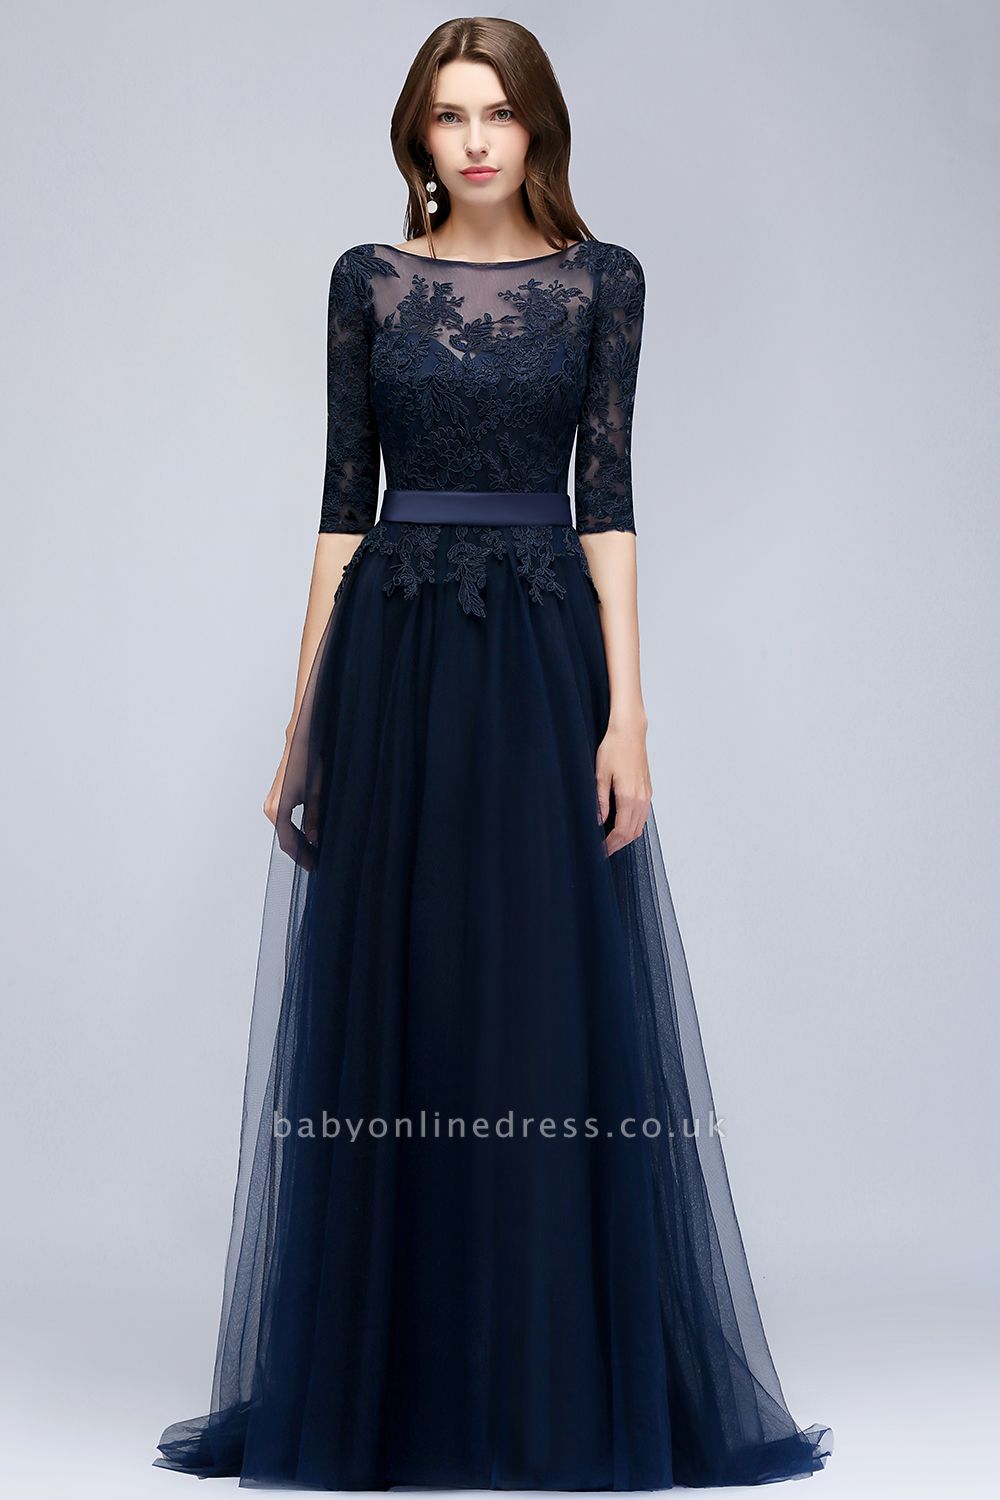 Winter Special Occasion Gowns from Nordstrom - Dress for the Wedding